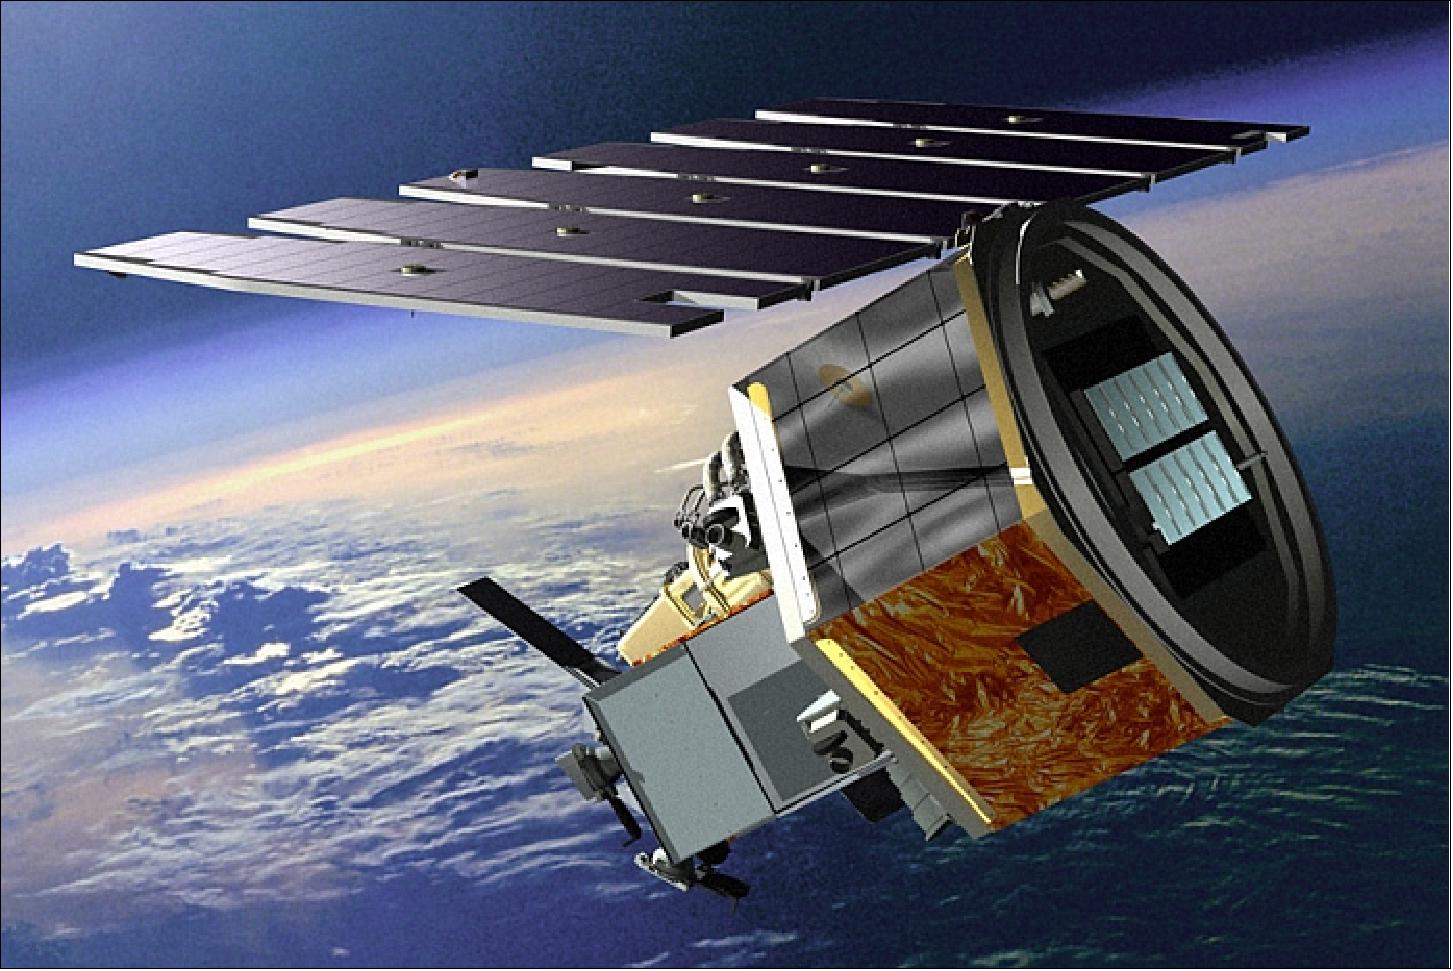 Figure 6: Alternate view of the deployed AIM spacecraft (image credit: OSC)